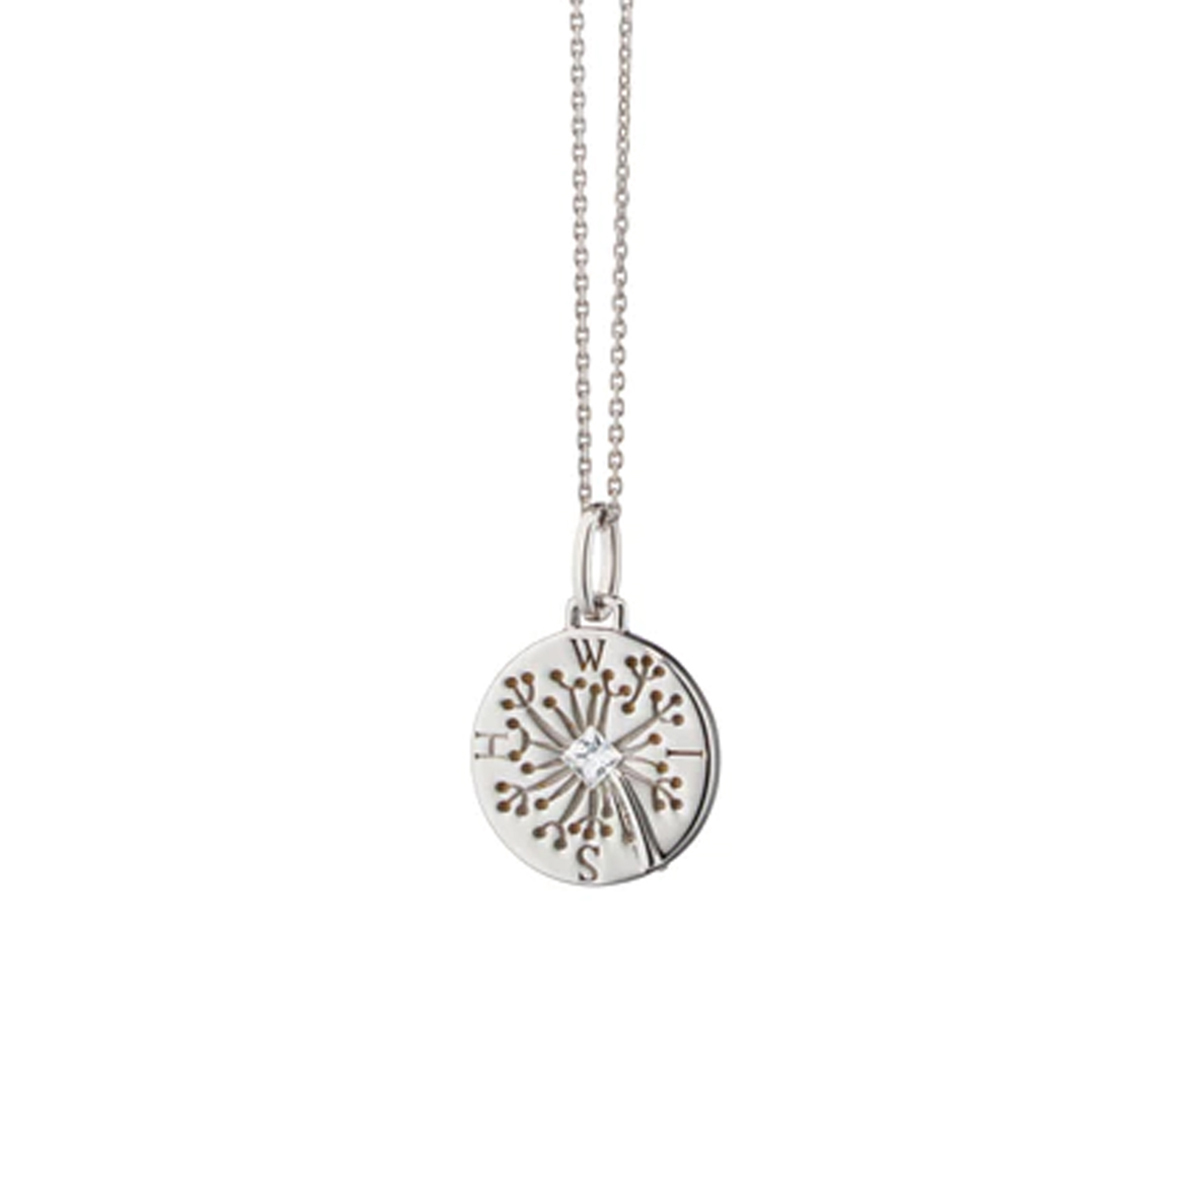 Sterling Silver "Wish" Dandelion Pendant with Chain